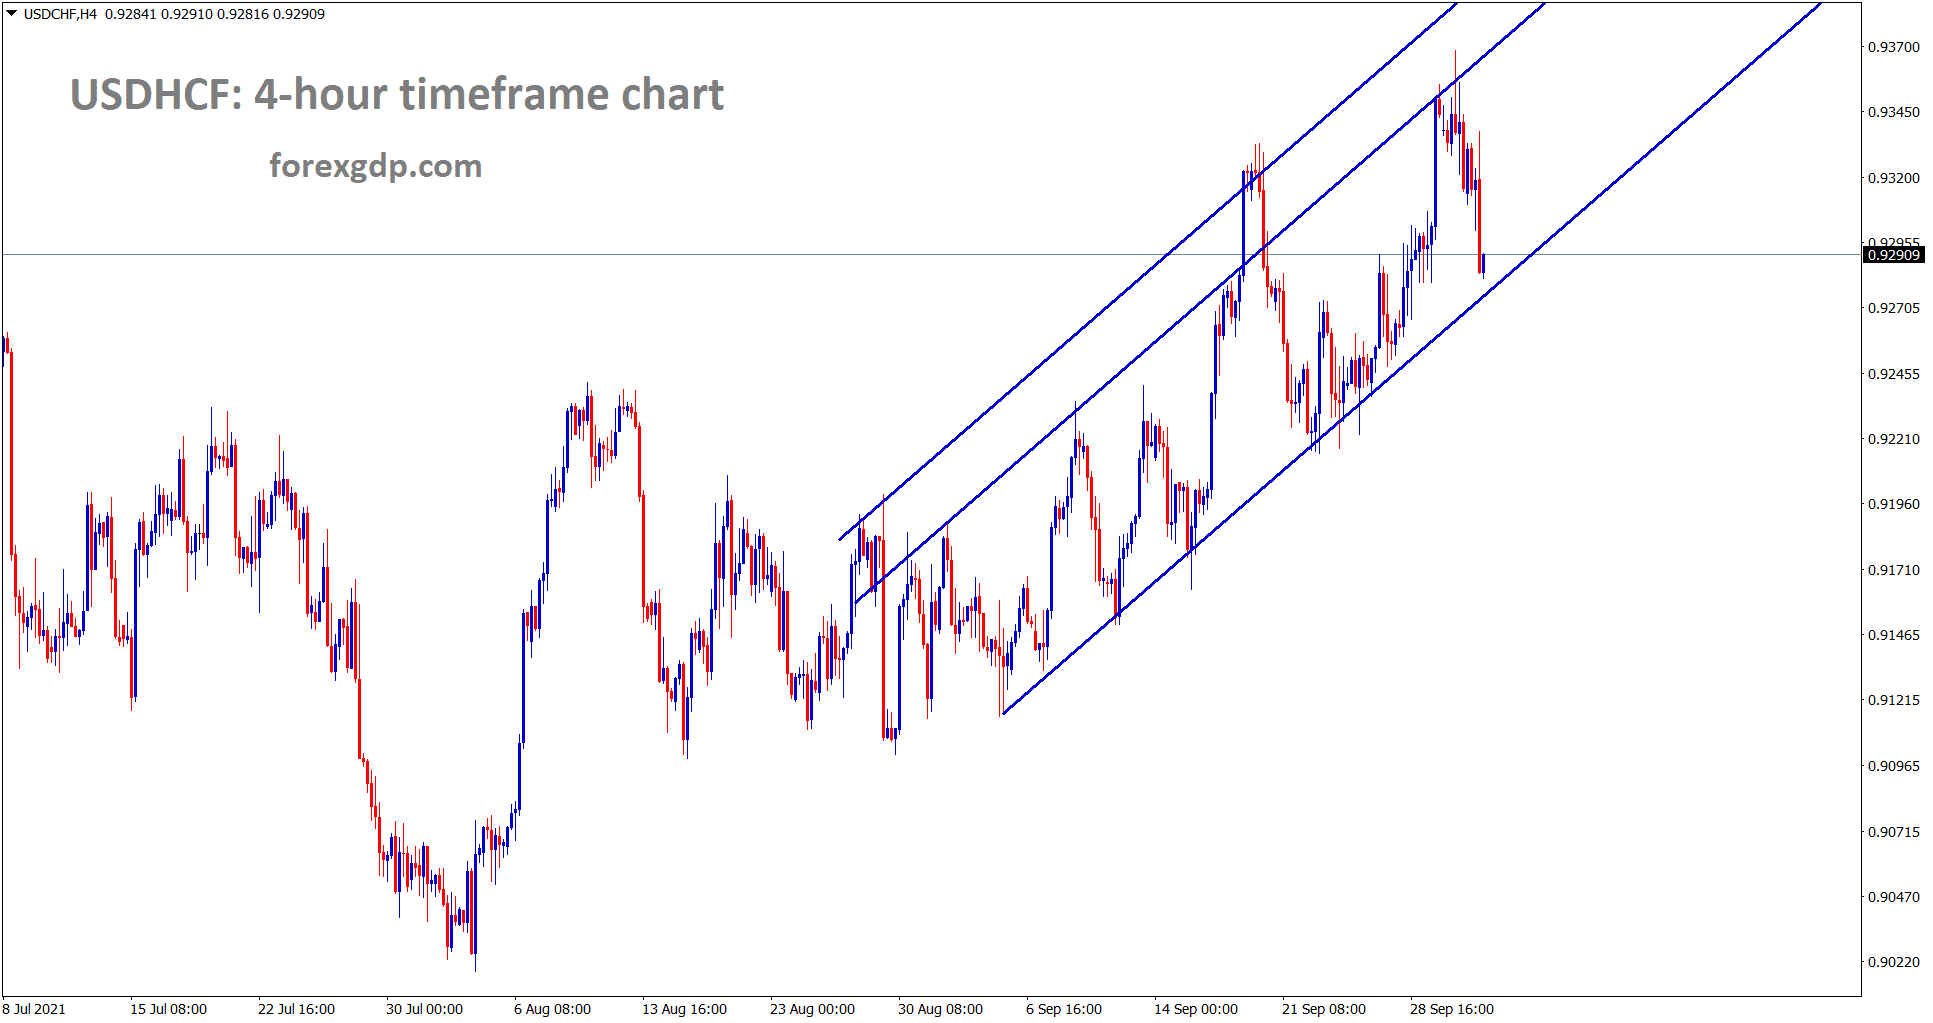 USDCHF is moving in an uptrend forming higher highs higher lows